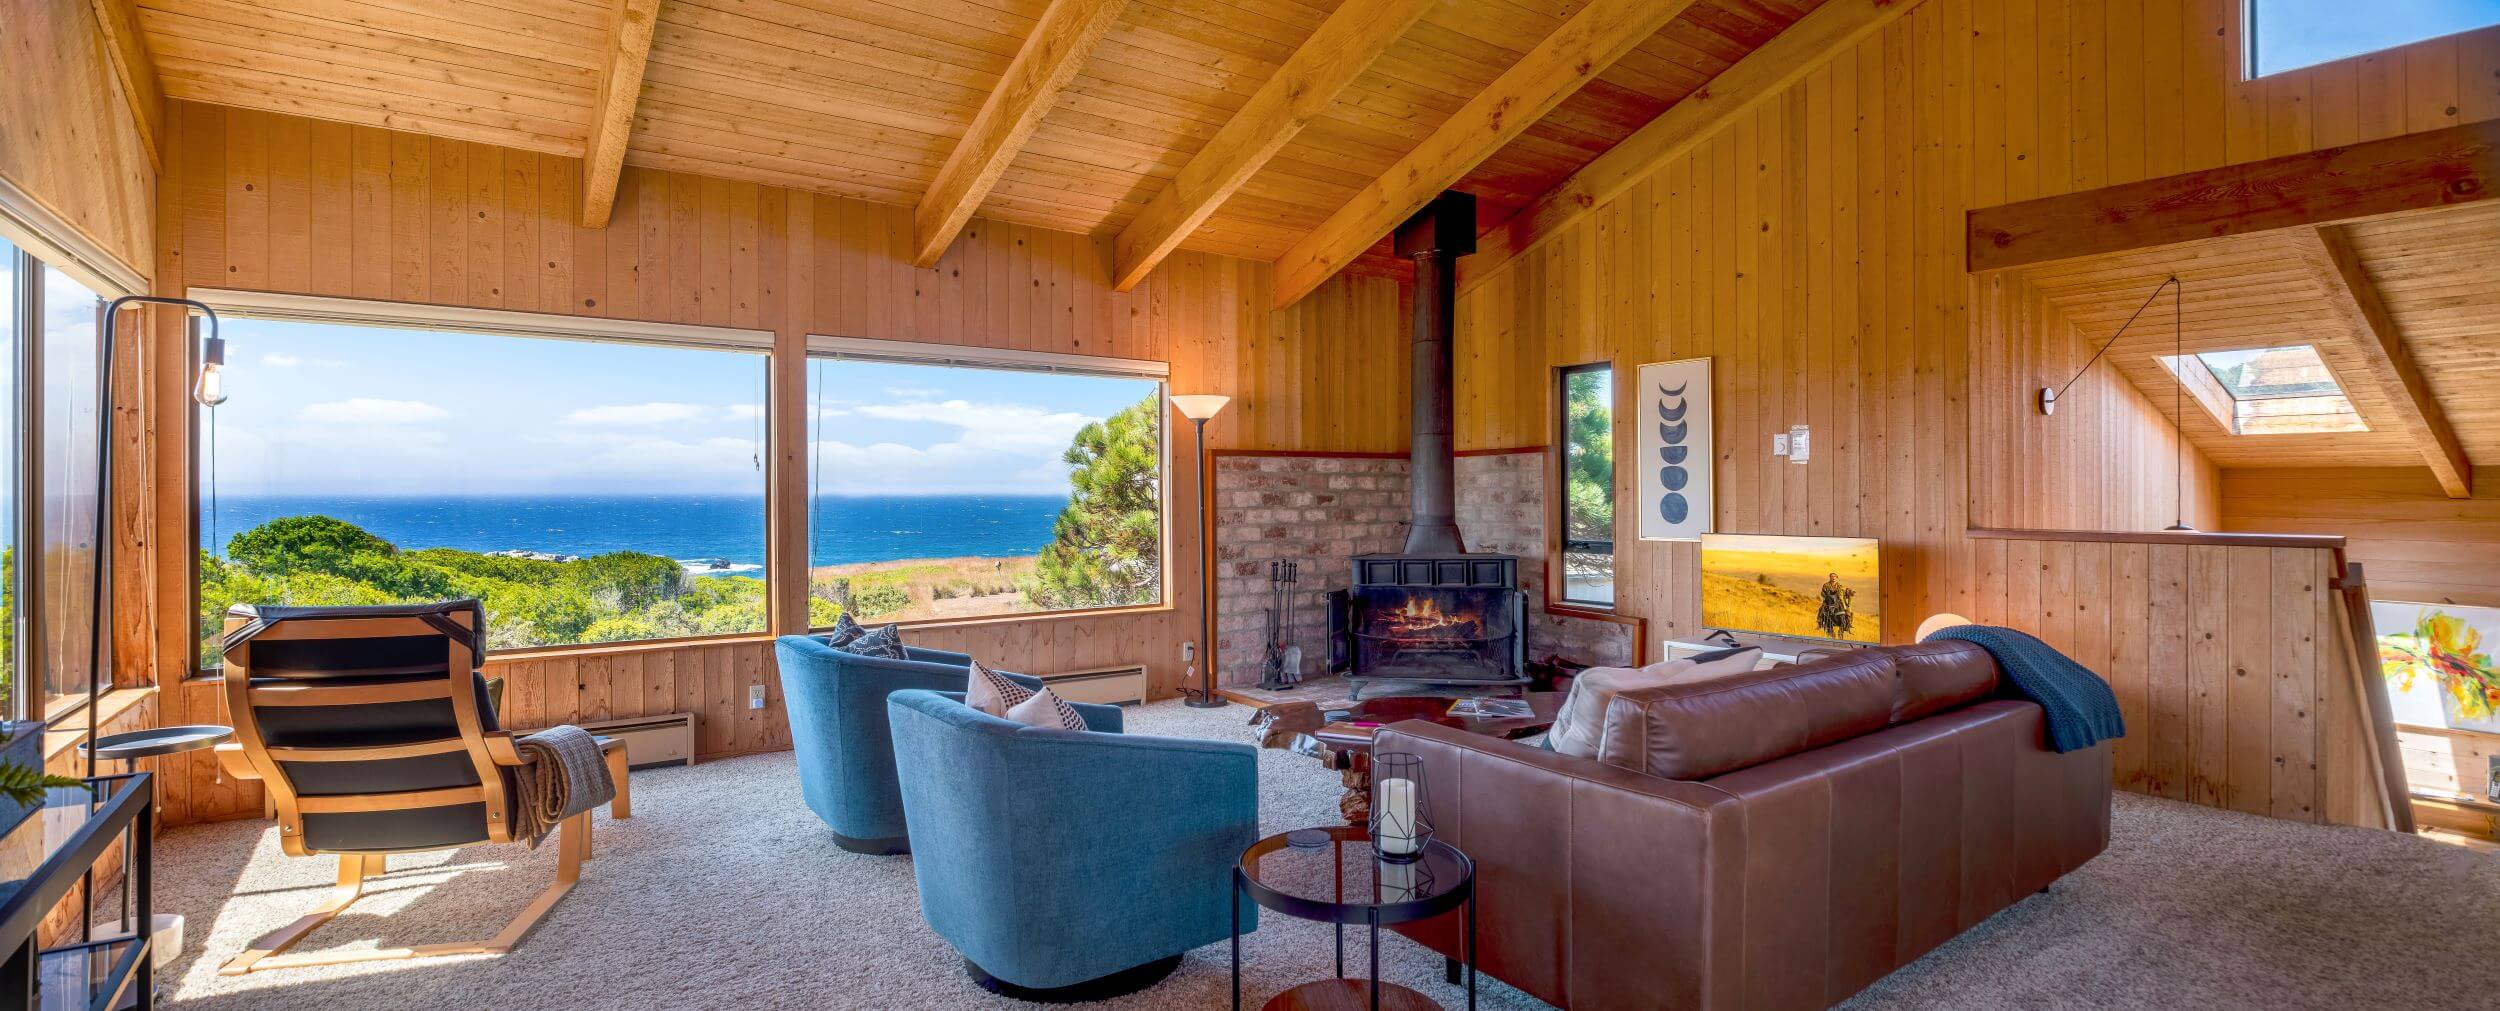 Sea Meadow: large view of living room, wood walls and ceiling, large windows with view of ocean.